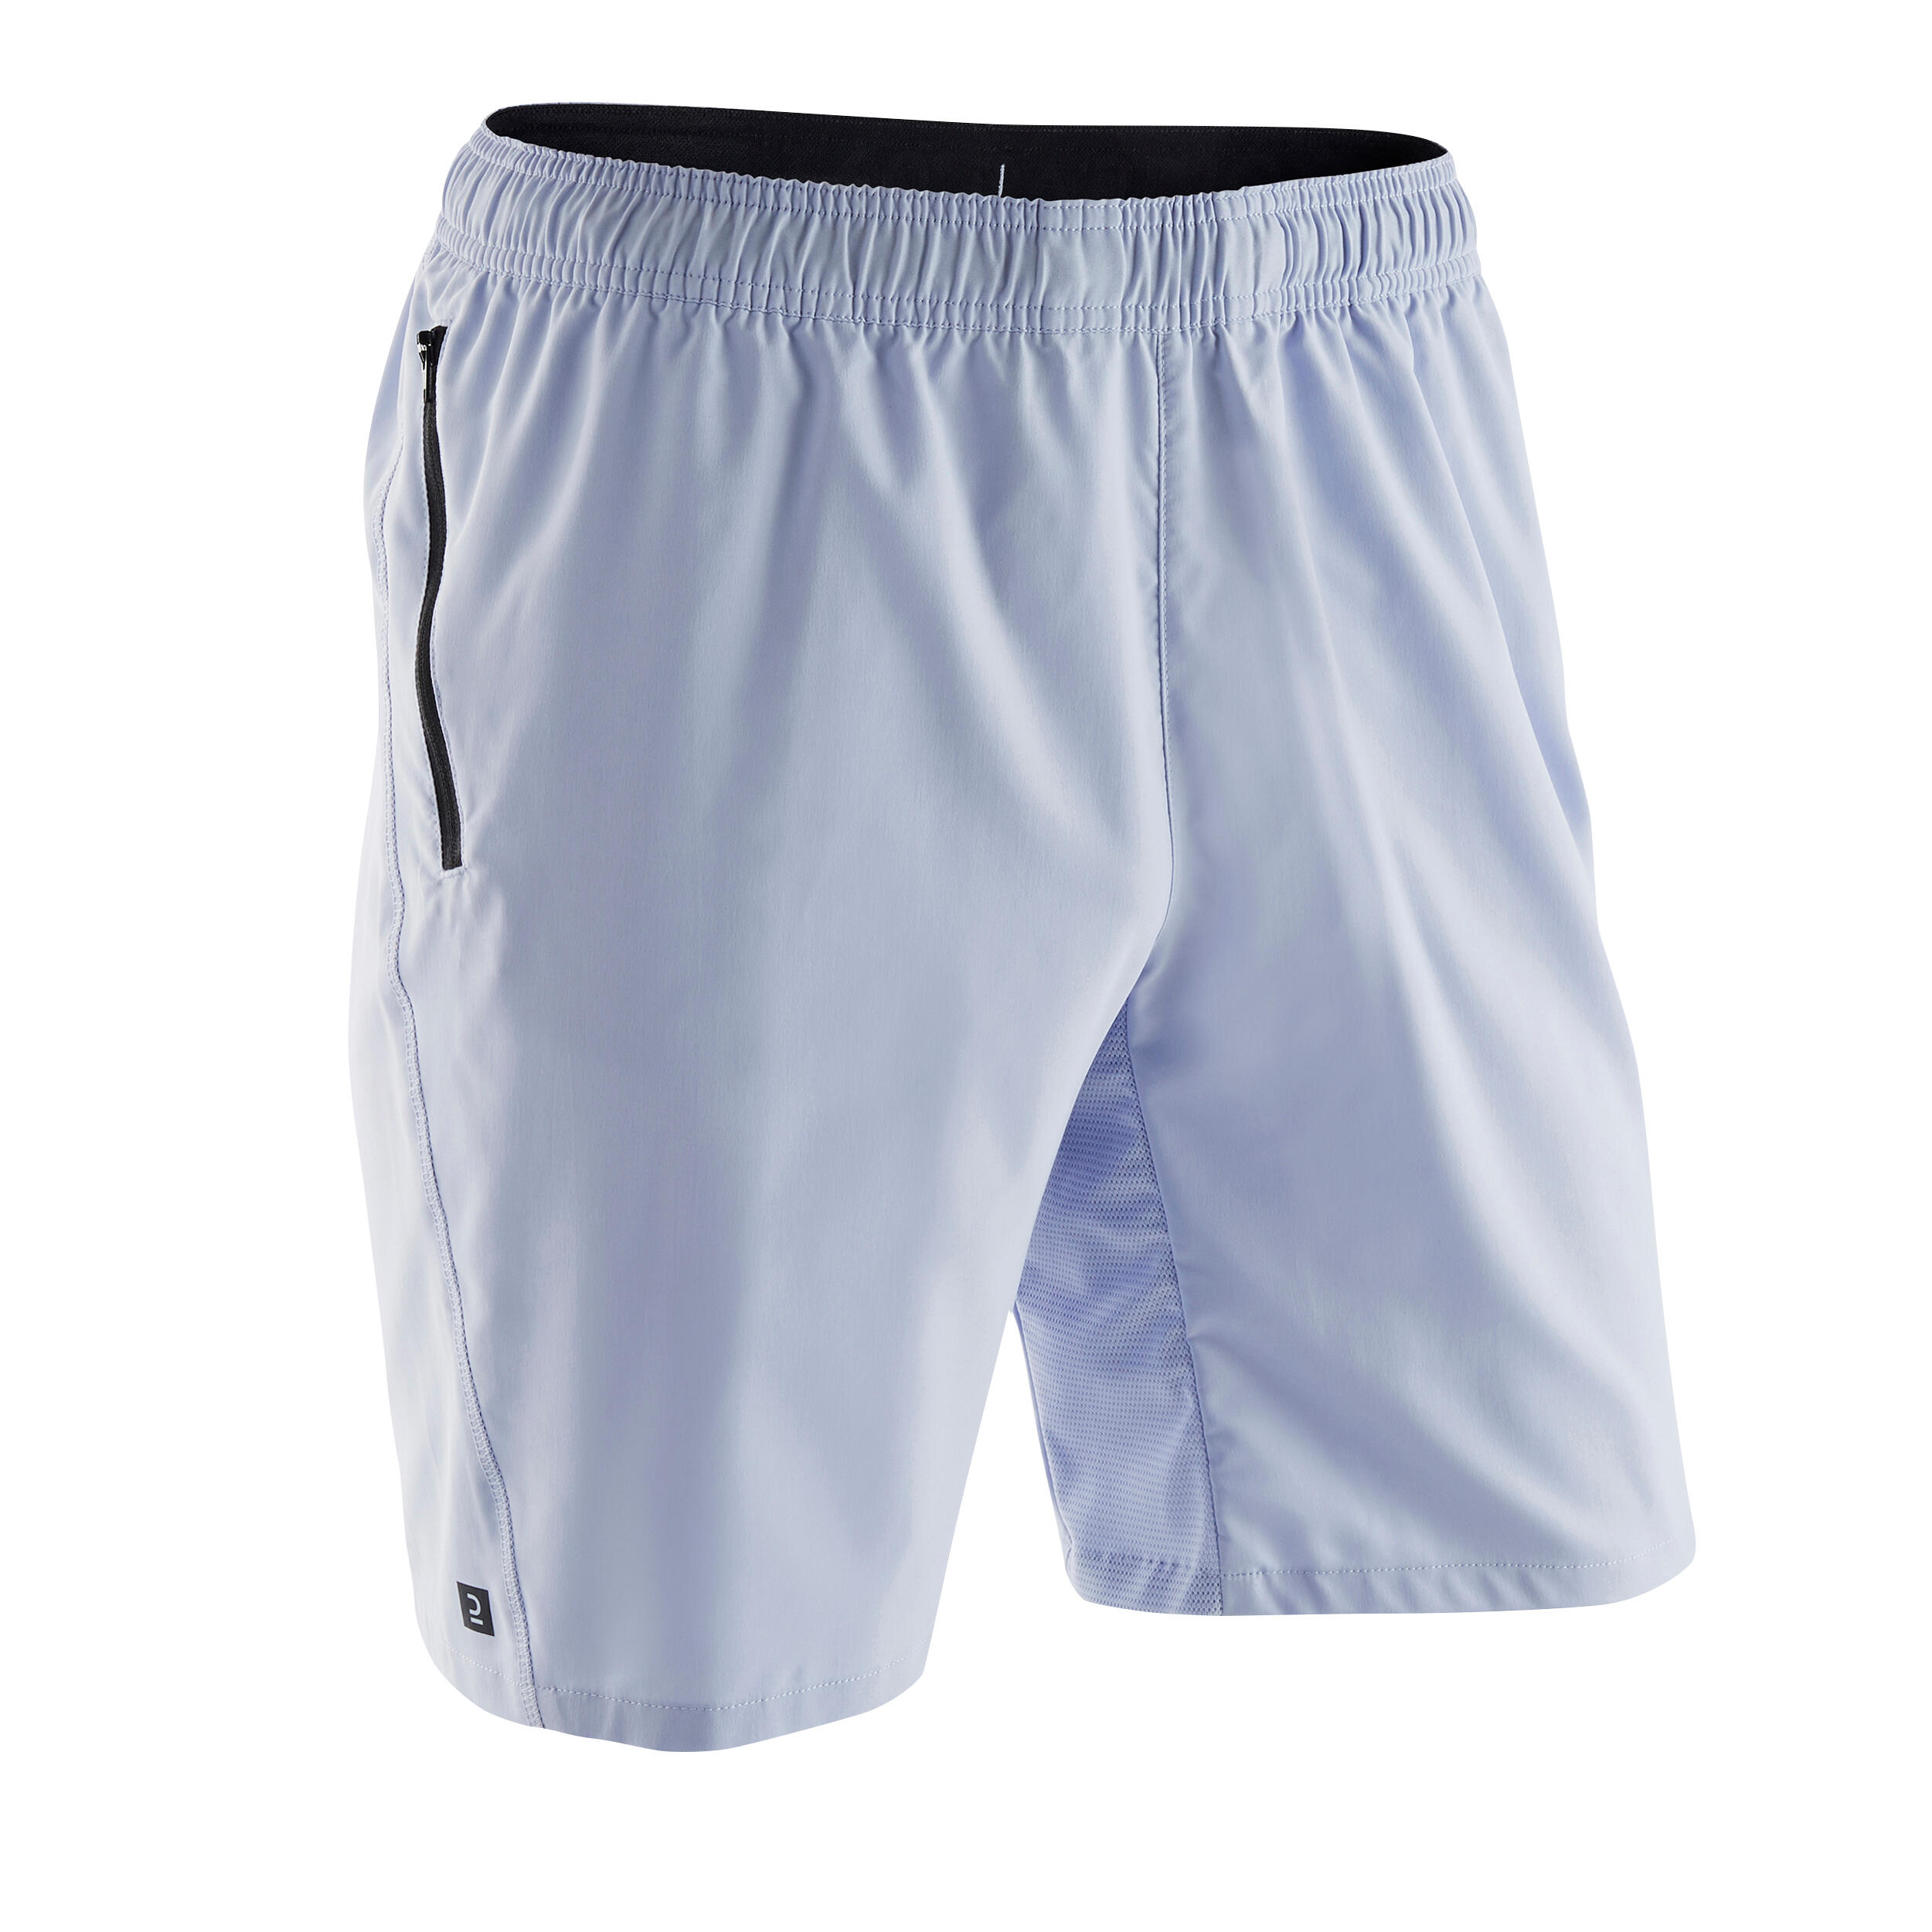 Men's Zip Pocket Breathable Essential Fitness Shorts - Lilac 5/5